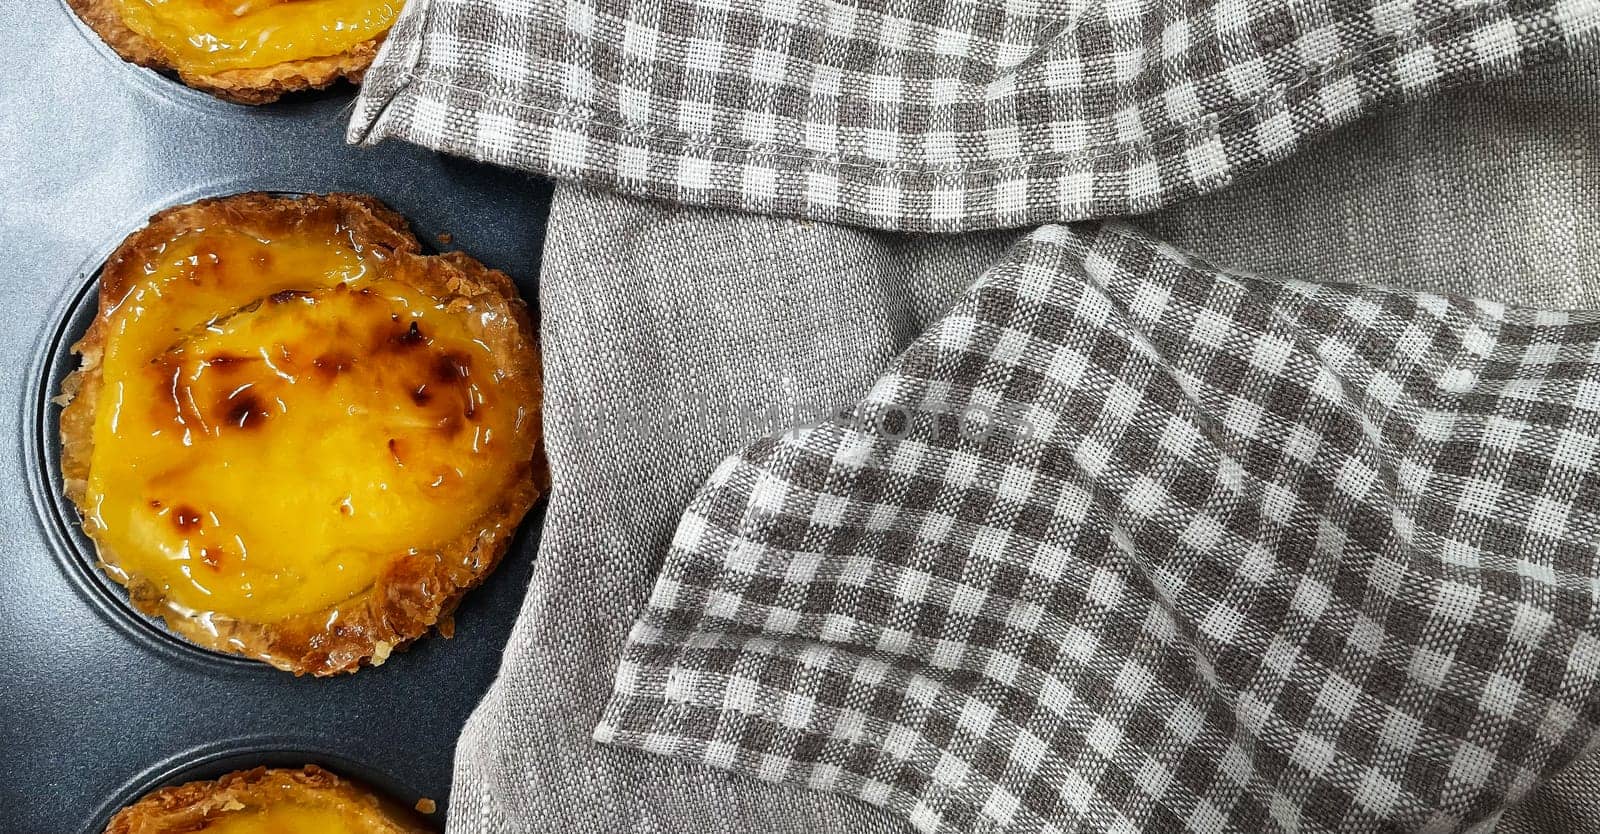 Lots of freshly baked Pastel de nata or Portuguese egg tart desserts in a baking dish. Pastel de Belme is a small pie with a crispy puff pastry crust and a custard filling. Small cupcake